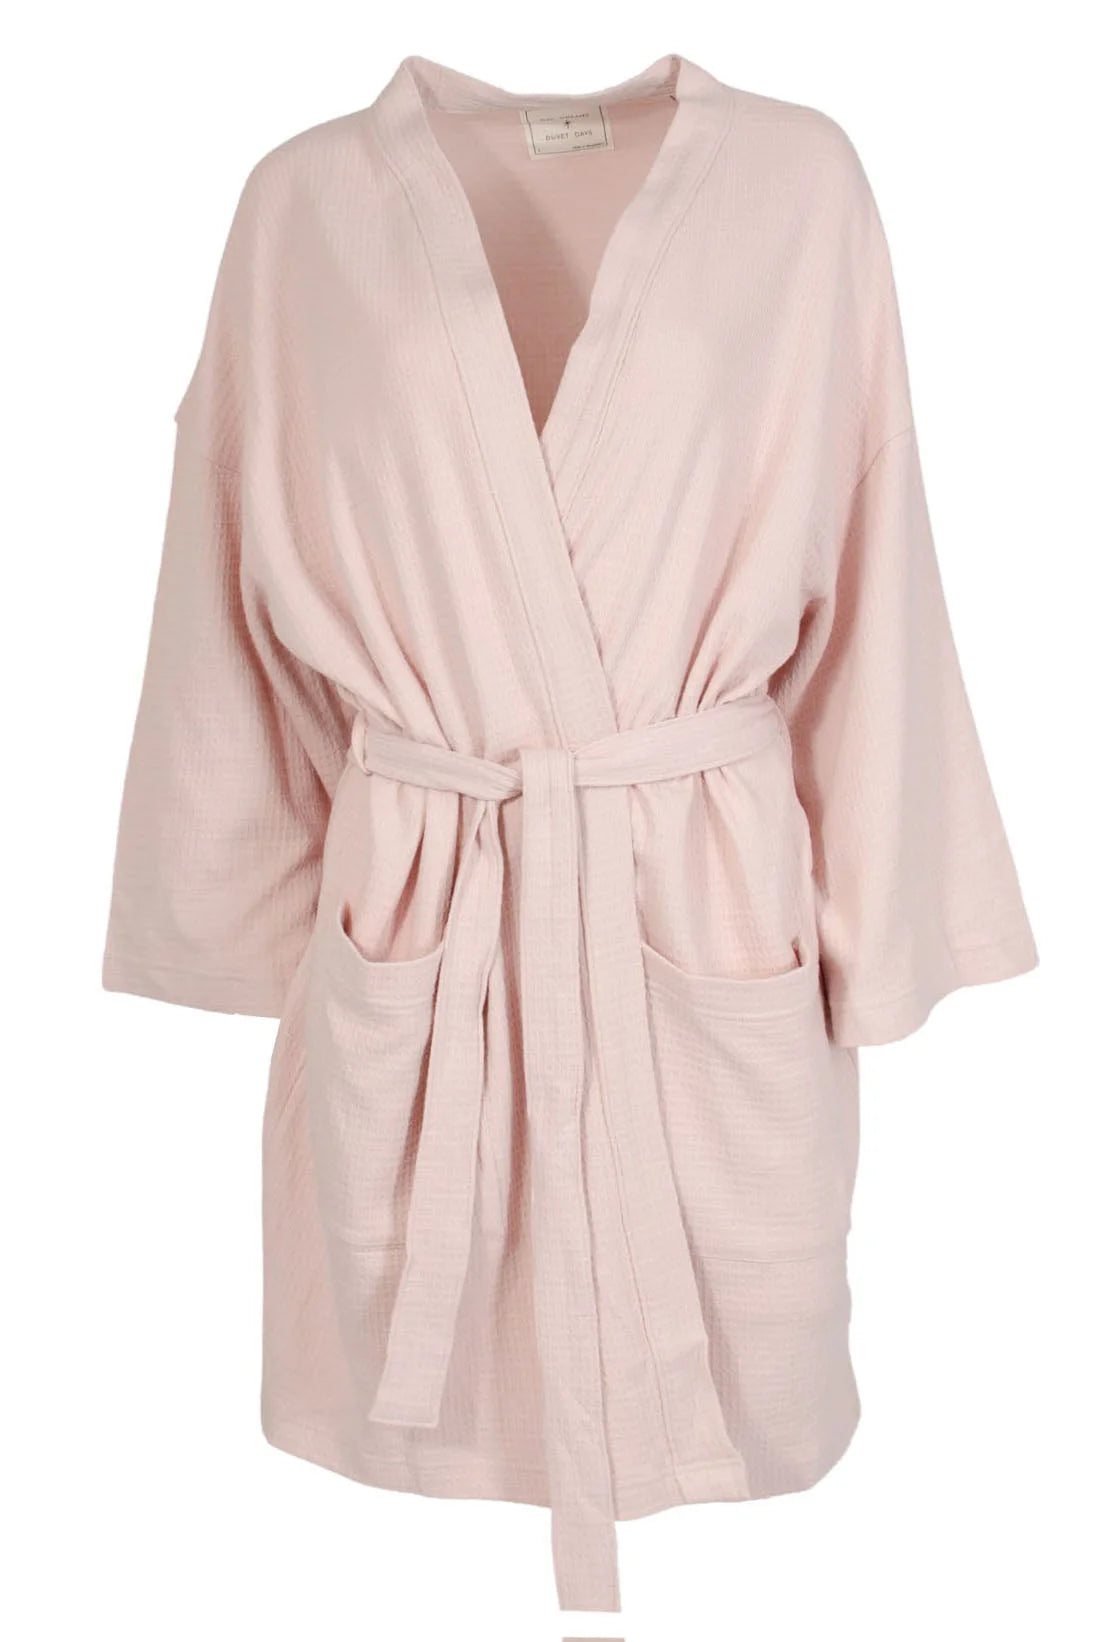 M&S Cotton Waffle Summer Dressing Gown